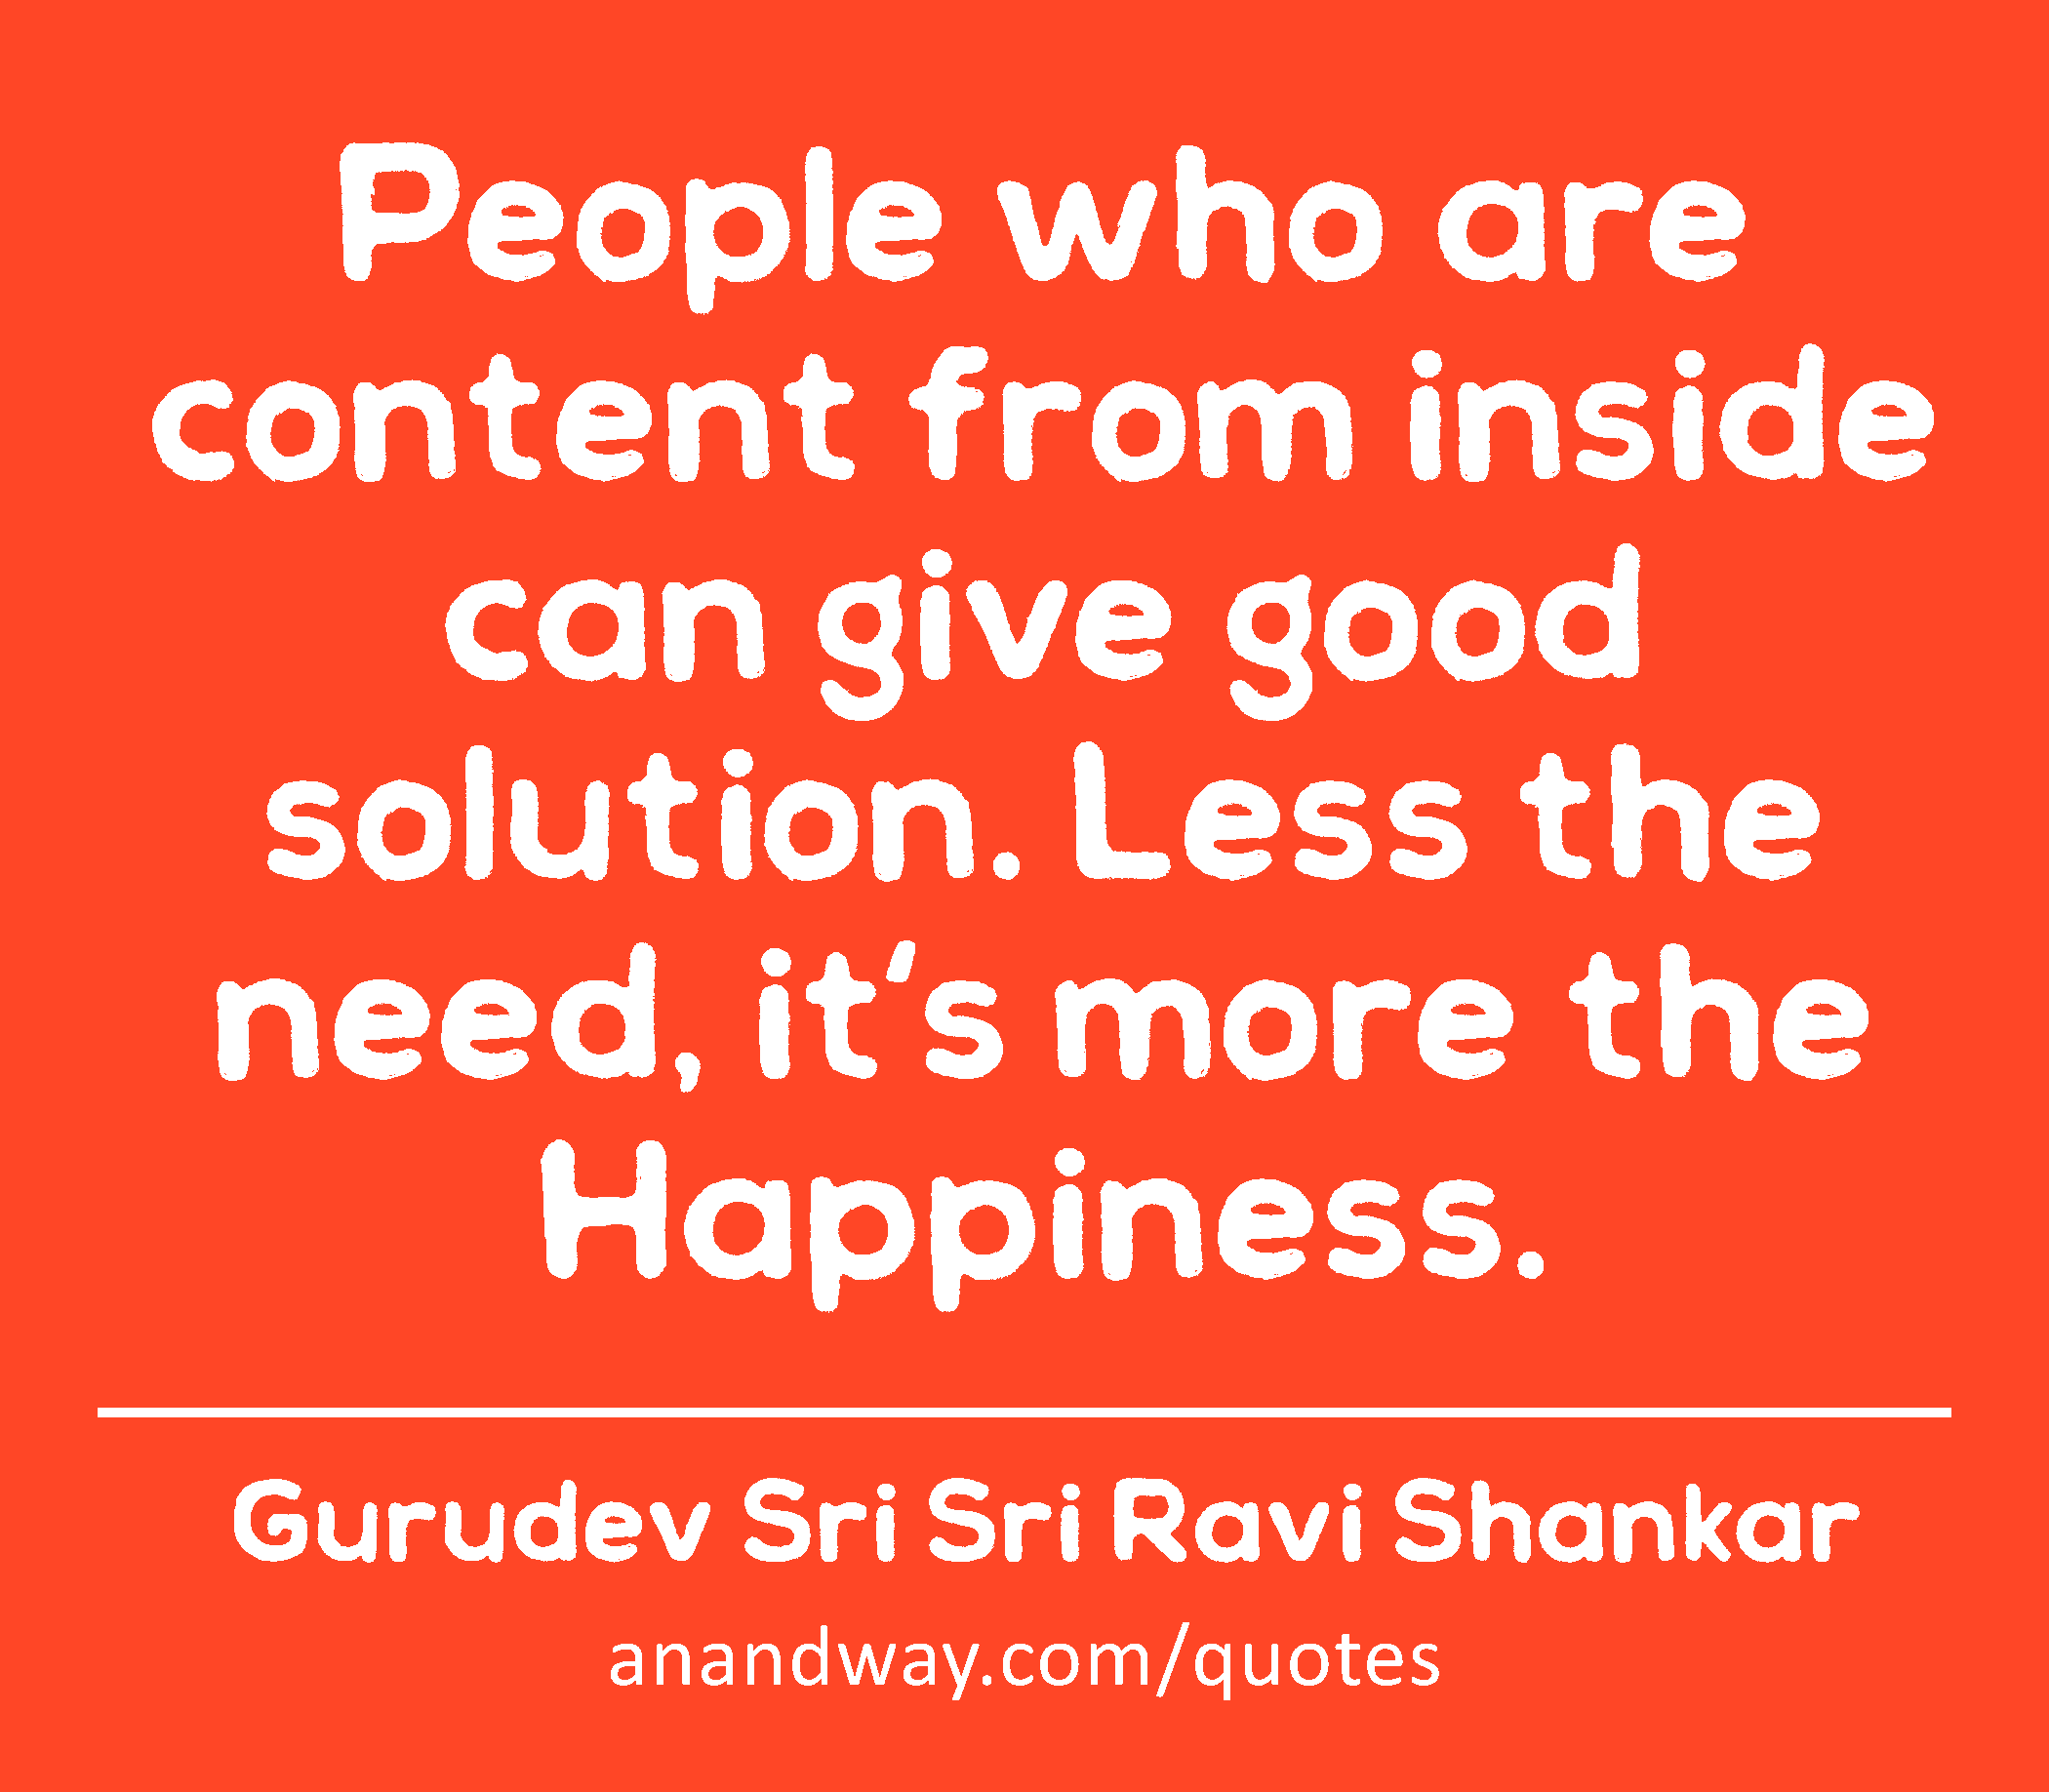 People who are content from inside can give good solution. Less the need, it's more the Happiness. 
 -Gurudev Sri Sri Ravi Shankar